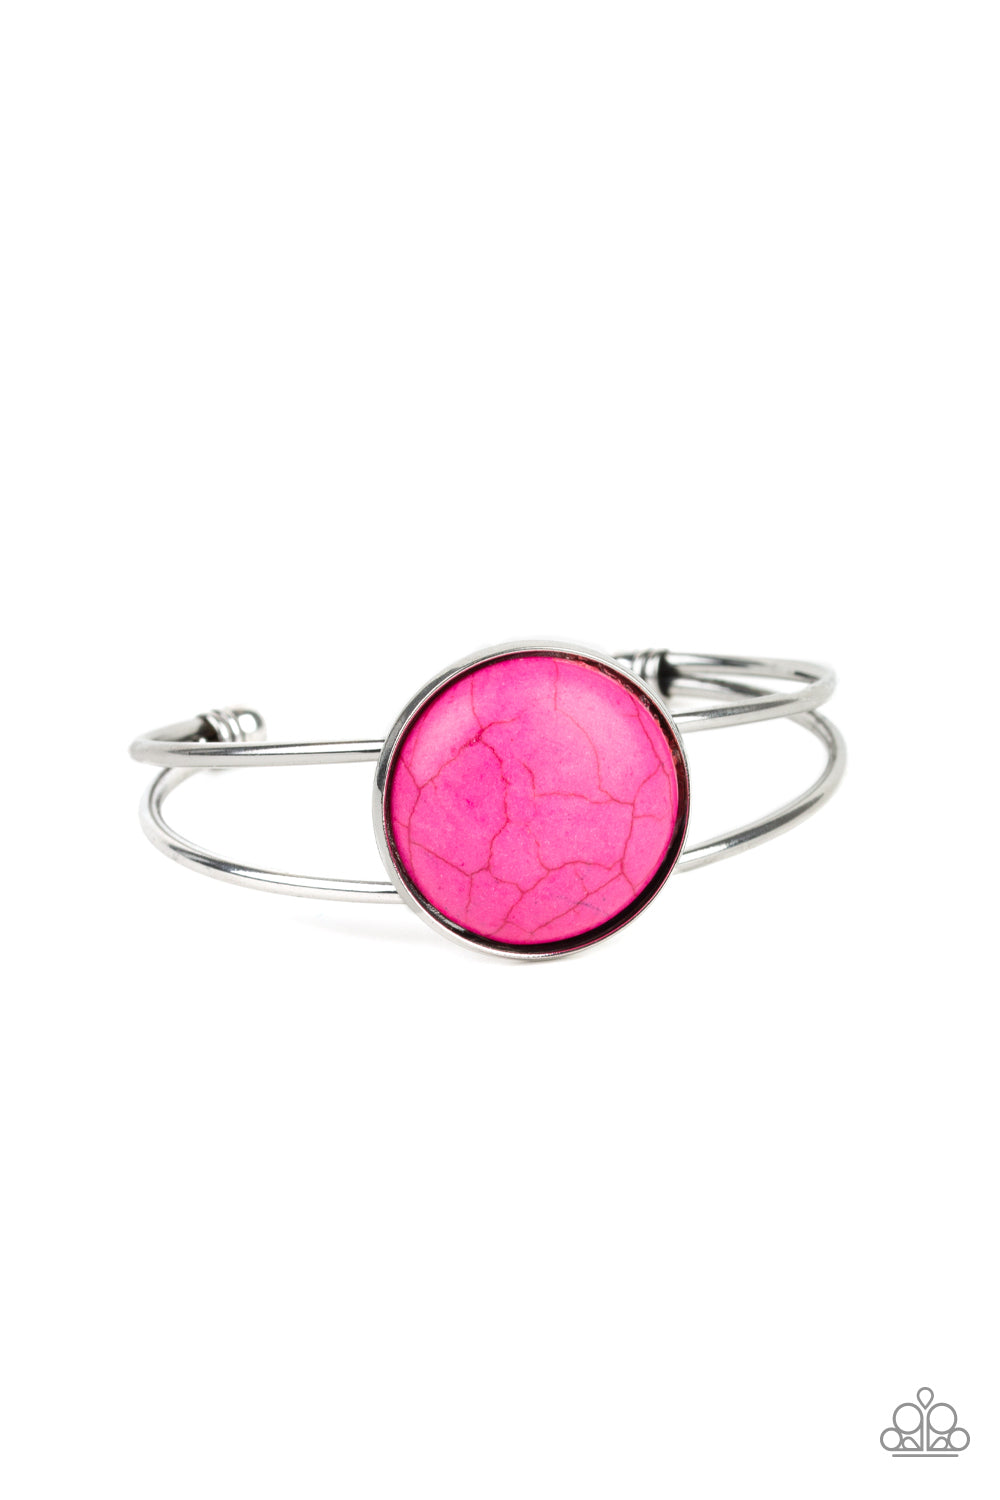 pittmanbling-and-jewelry-inc-presentssandstone-serenity-pink-bracelet-paparazzi-accessories